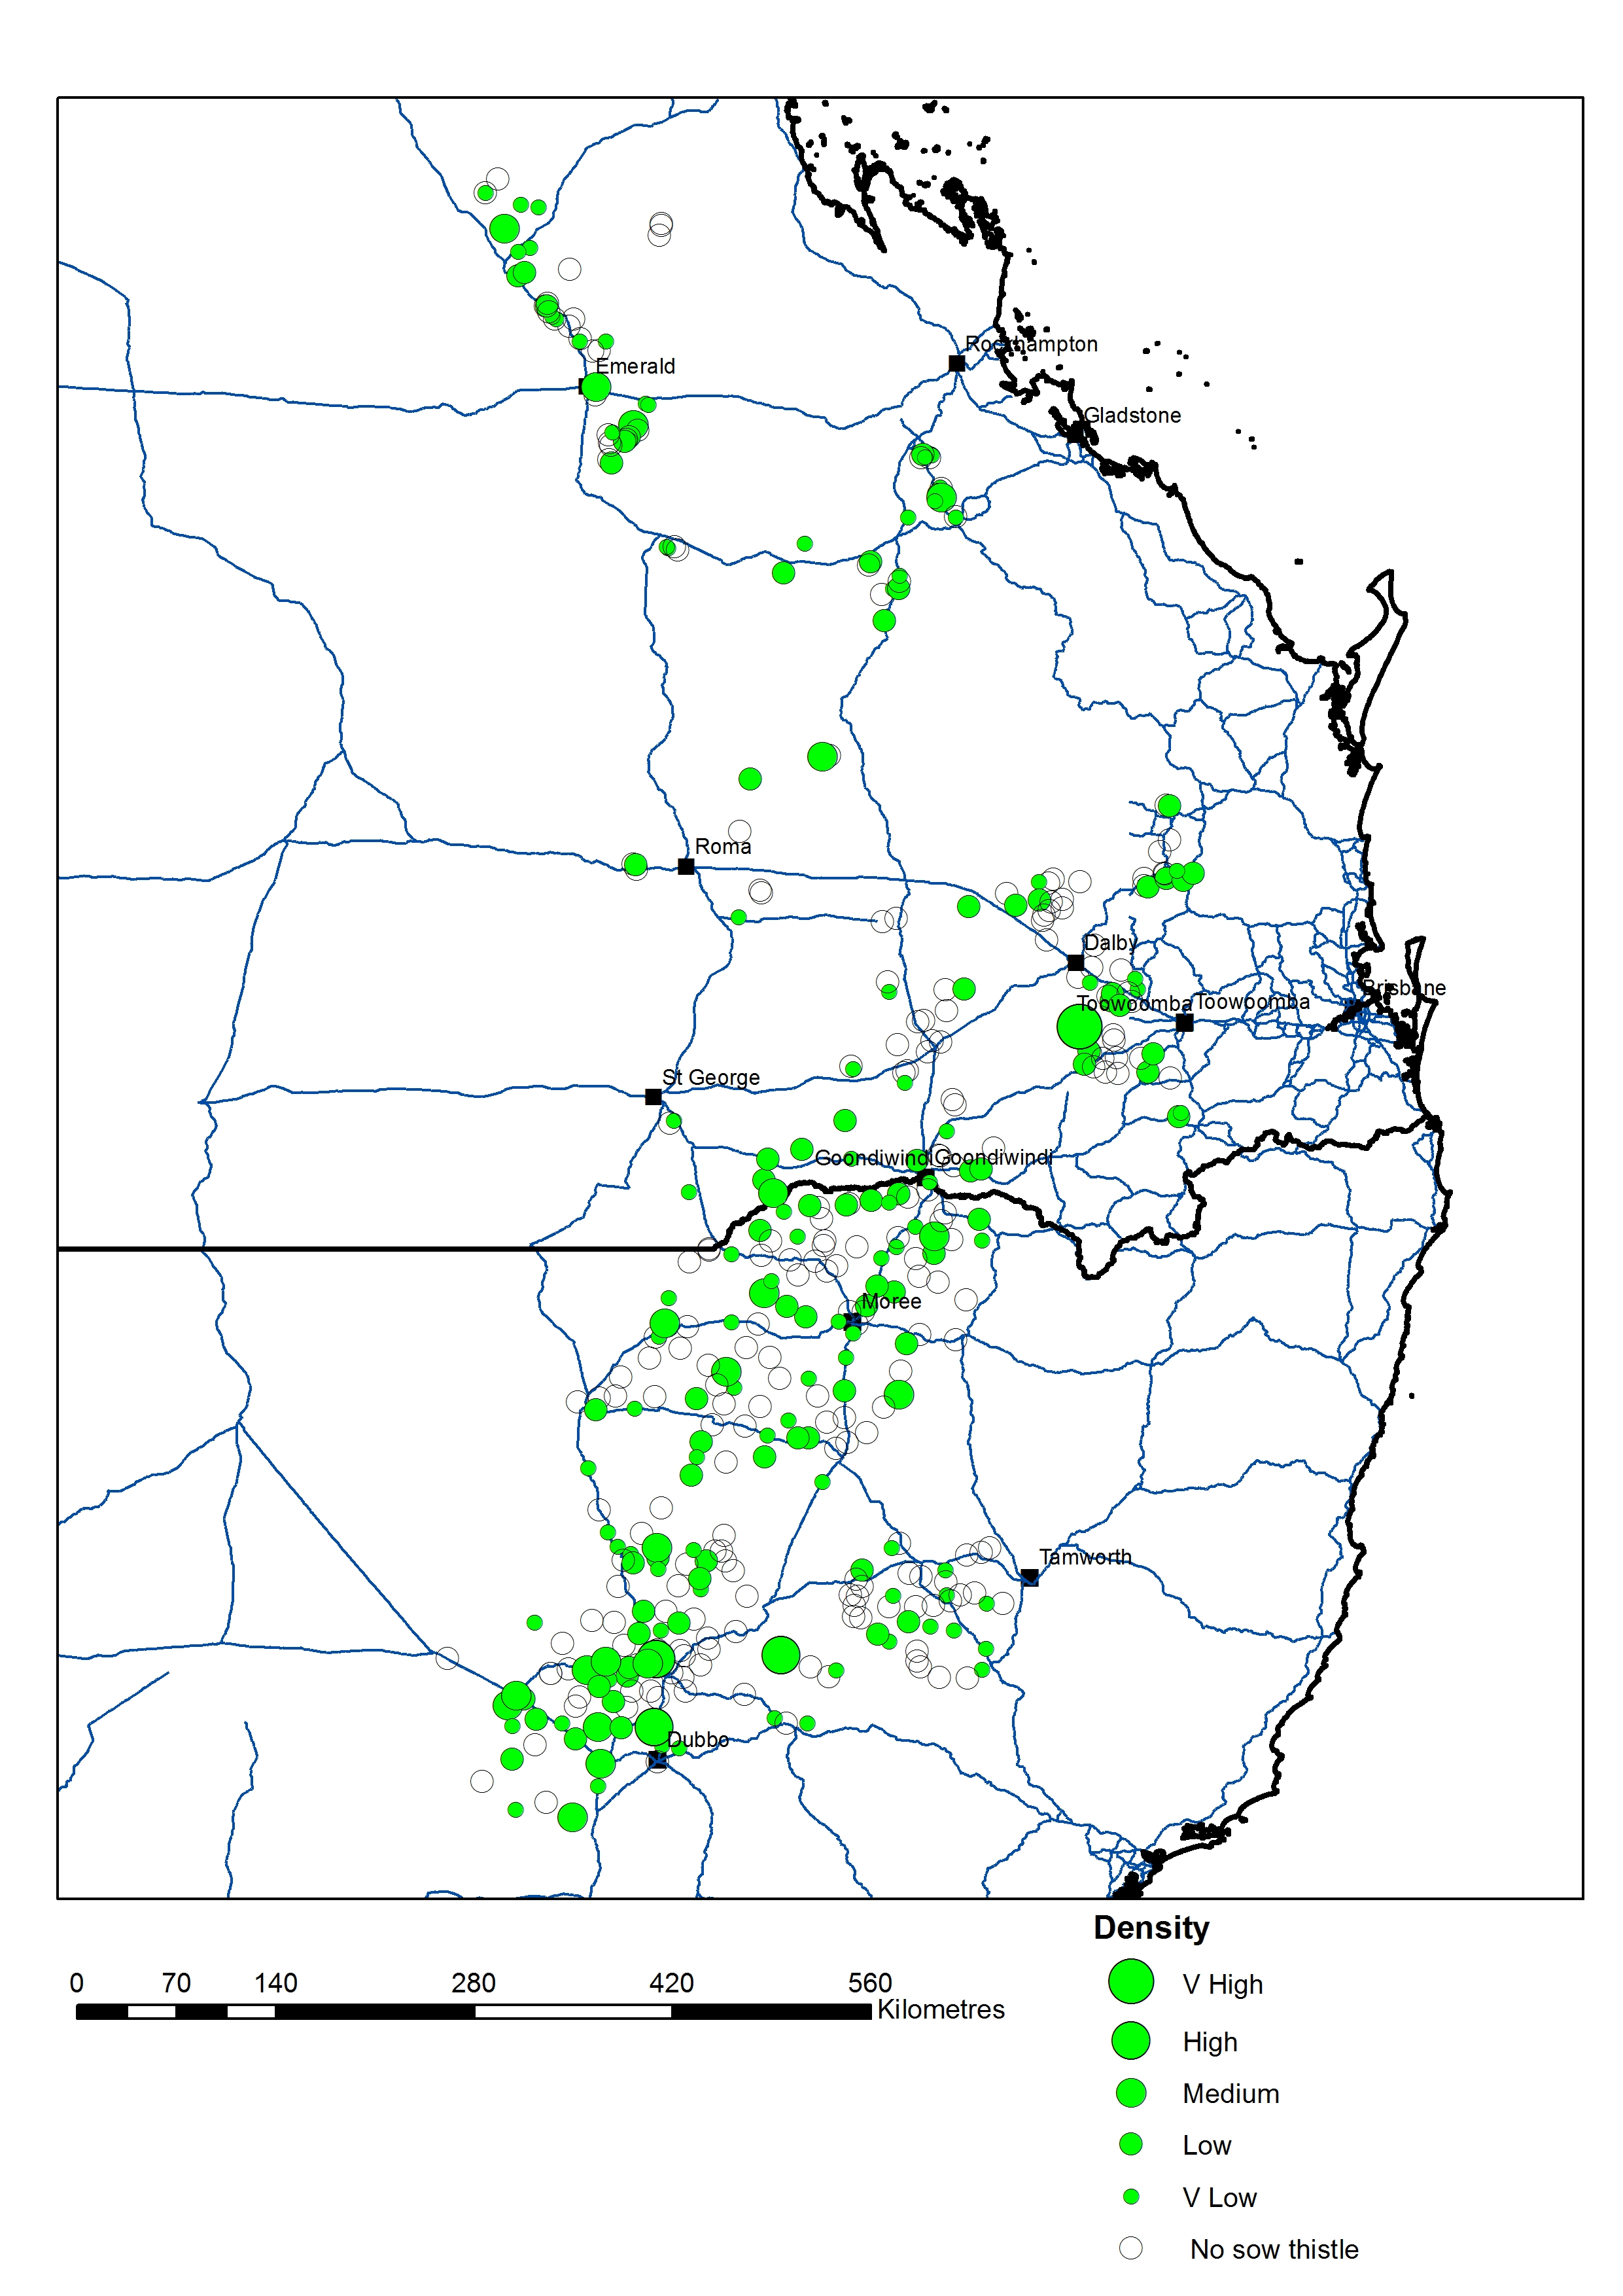 Figure 2 is map of NSW and Qld which shows the collection locations of sow thistle samples and population density.